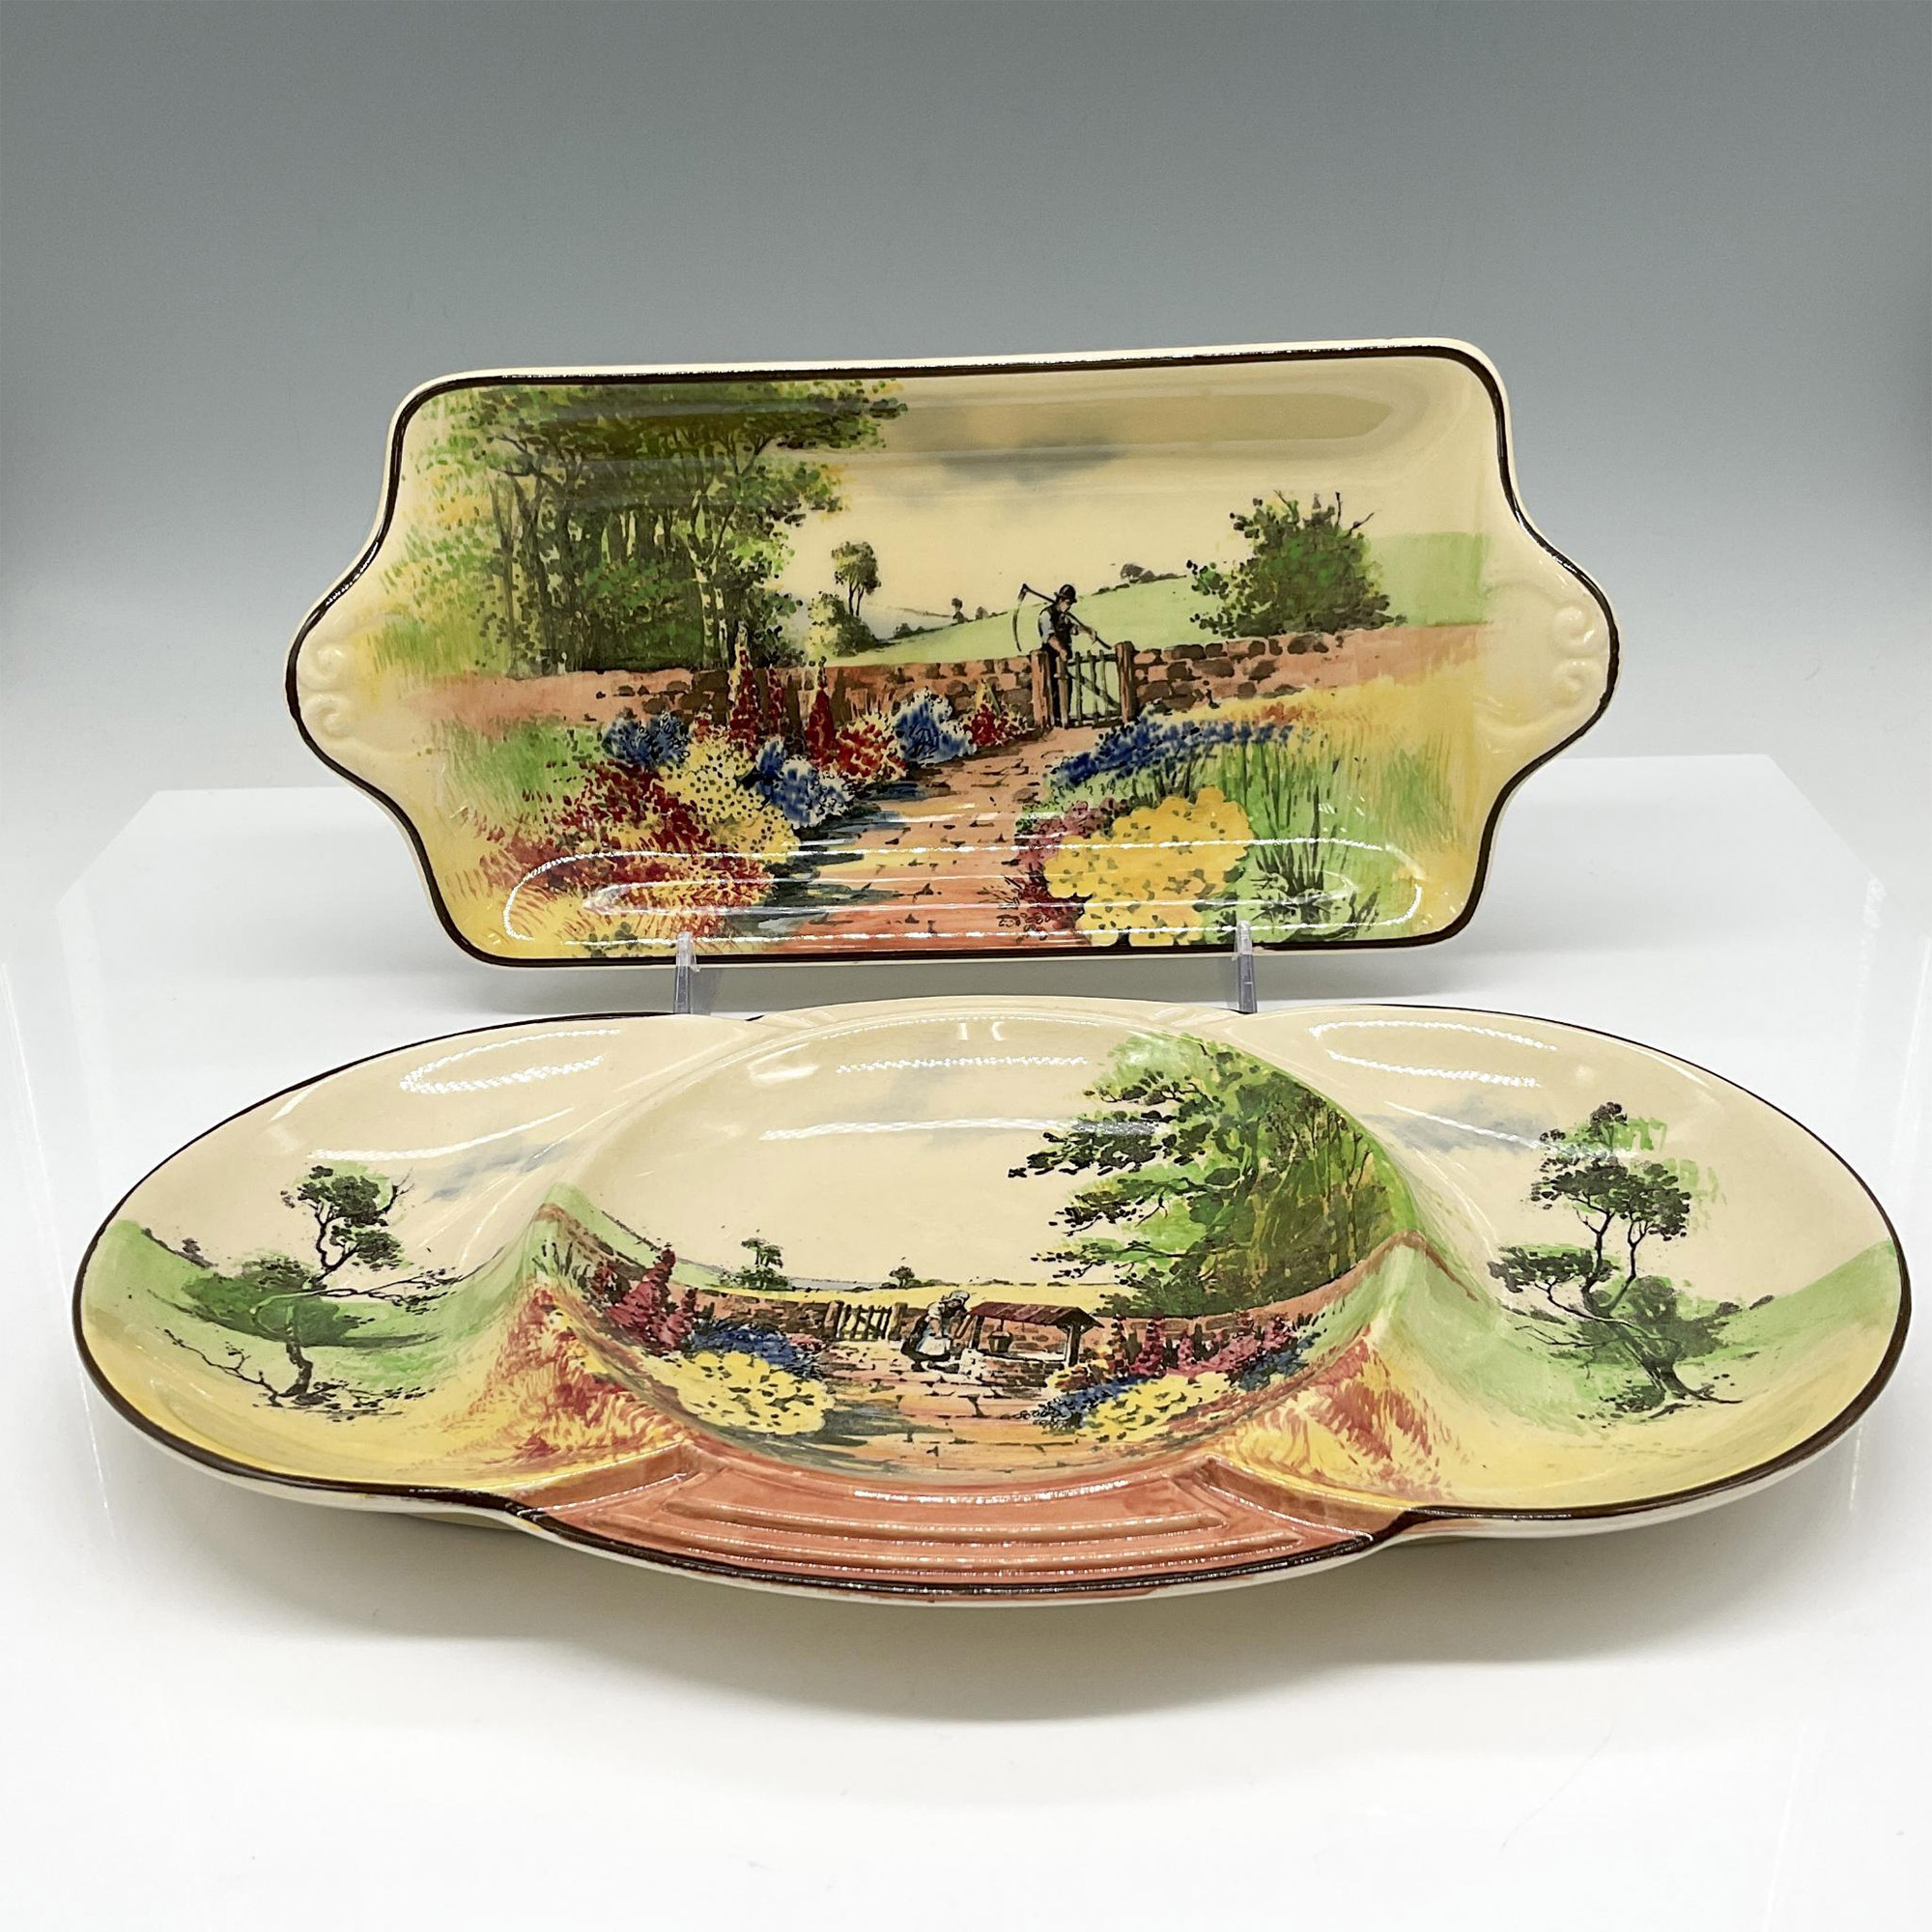 2pc Royal Doulton Series Ware Plates, The Milkmaid - Image 2 of 3